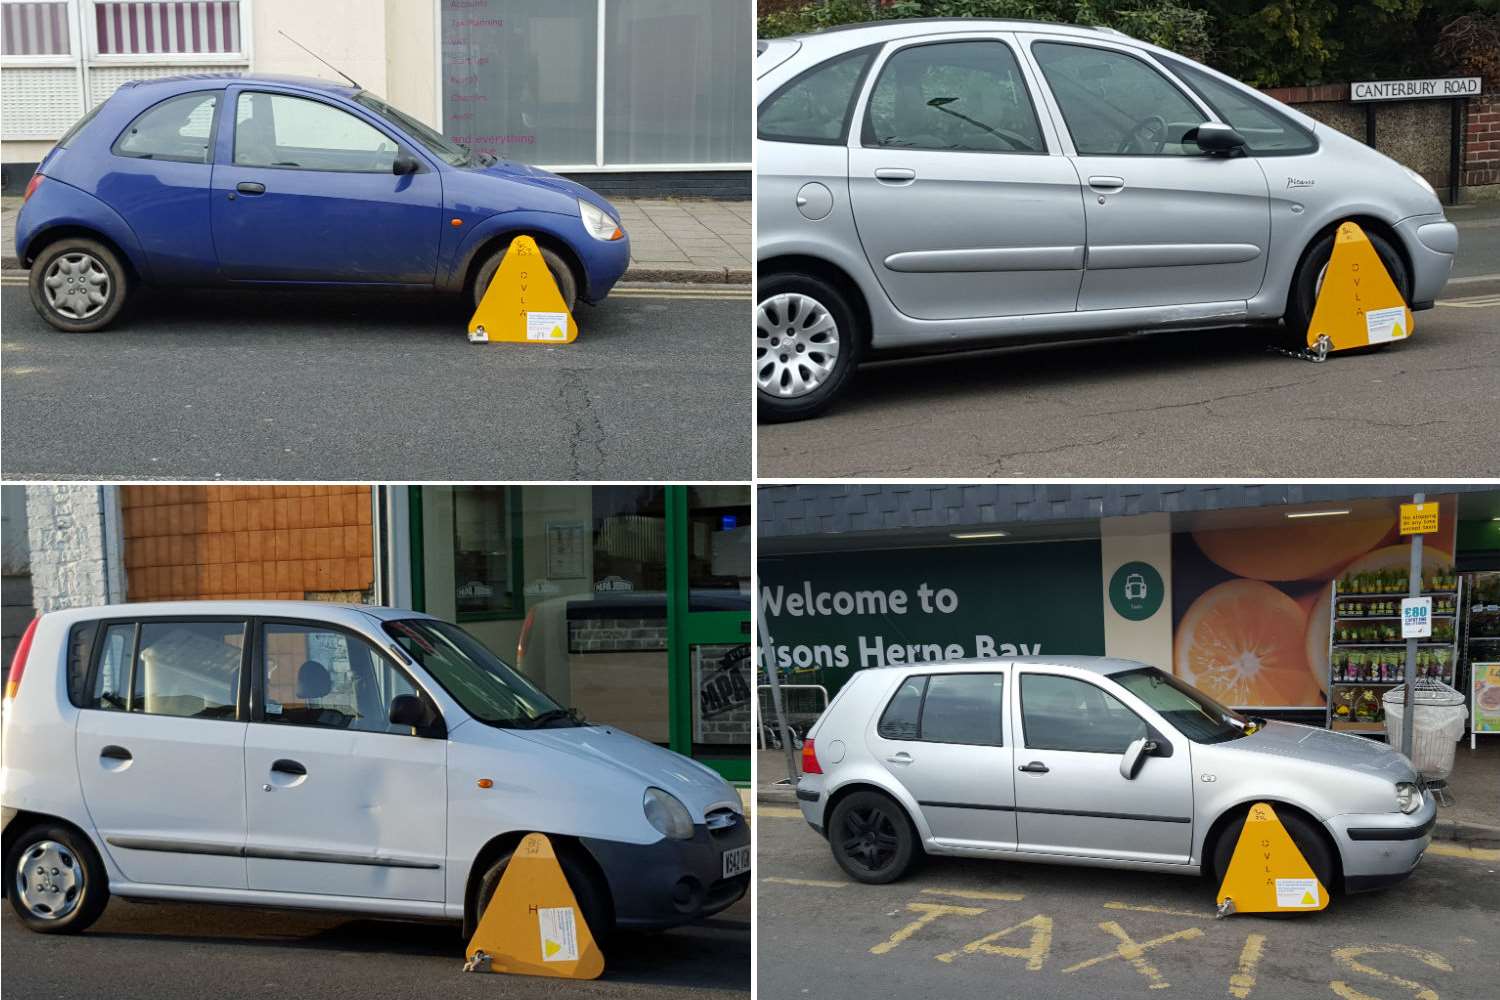 Thirteen cars - including these - were clamped in Herne Bay